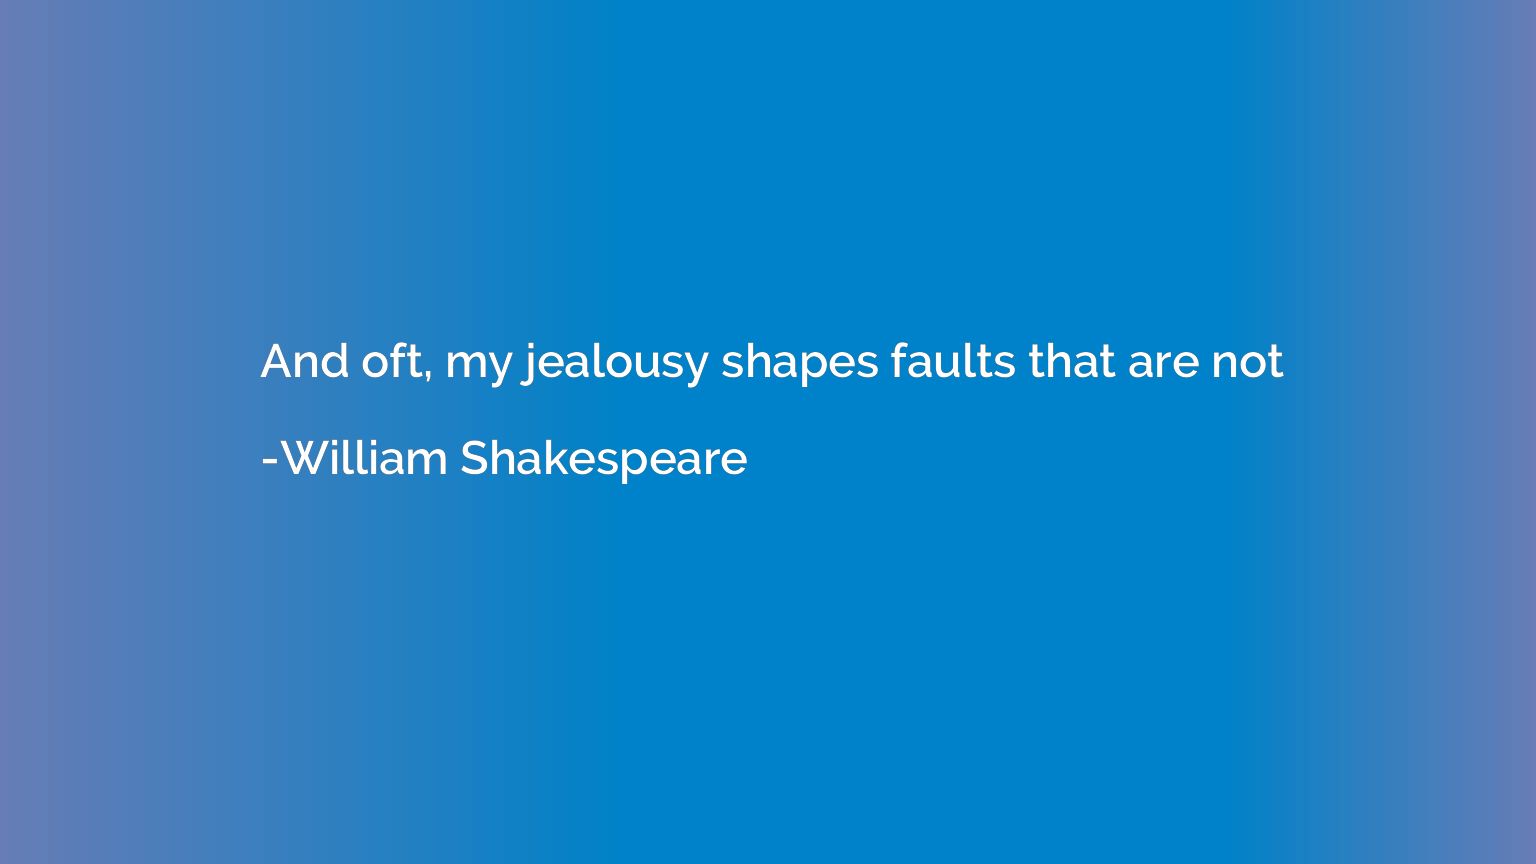 And oft, my jealousy shapes faults that are not